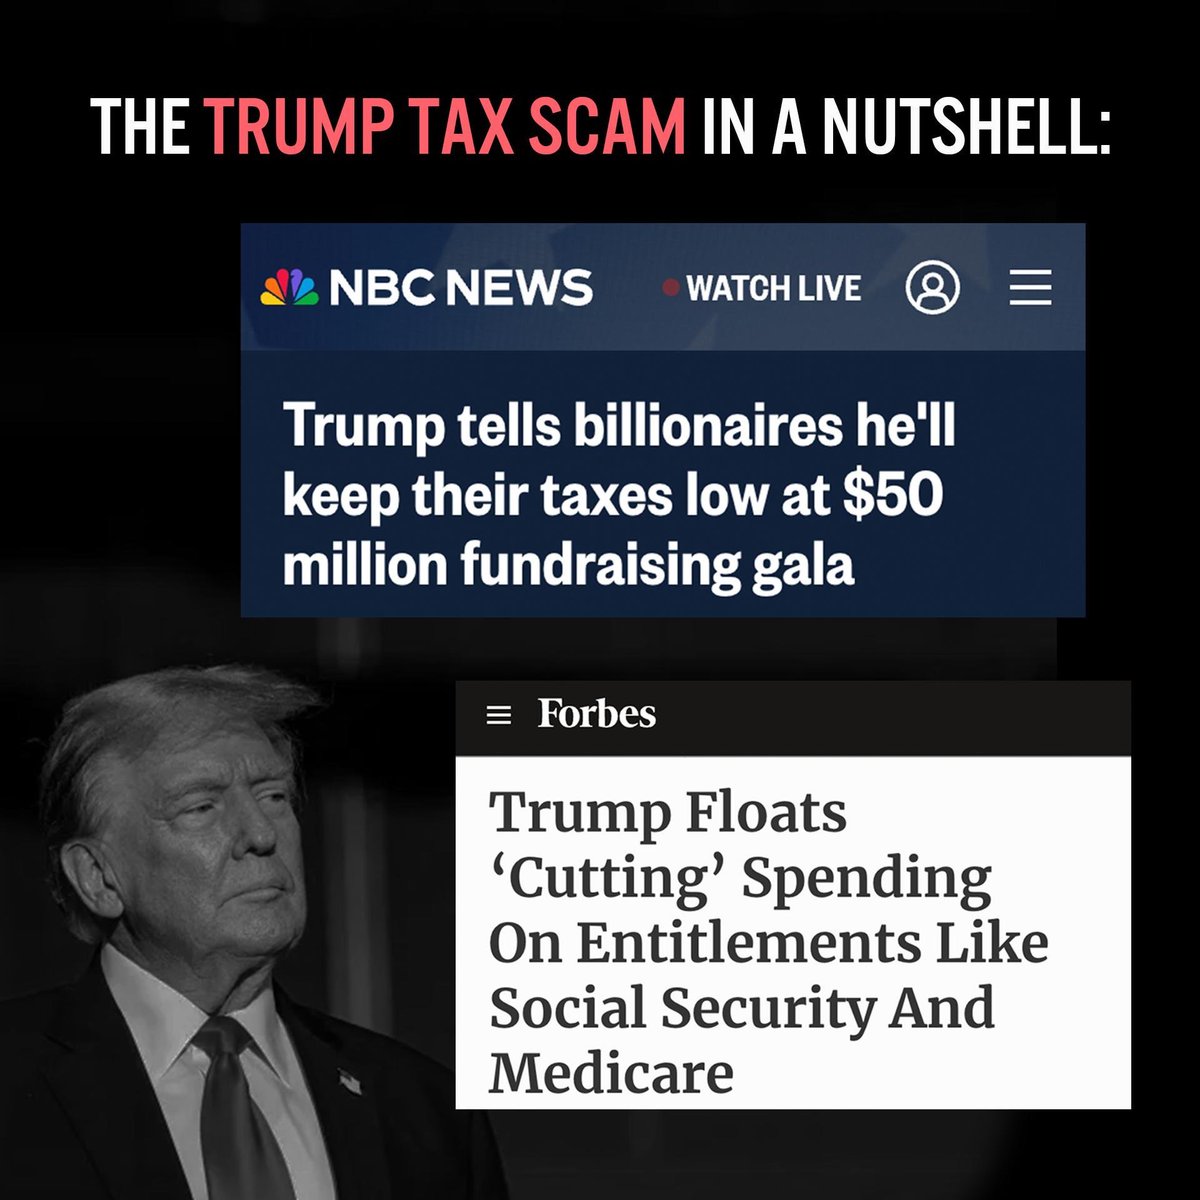 Trump wants to give his billionaire buddies a 4 trillion dollar tax break and cut your Social Security and Medicare to pay for it. We will stop him! #StopTrumpsTaxScam